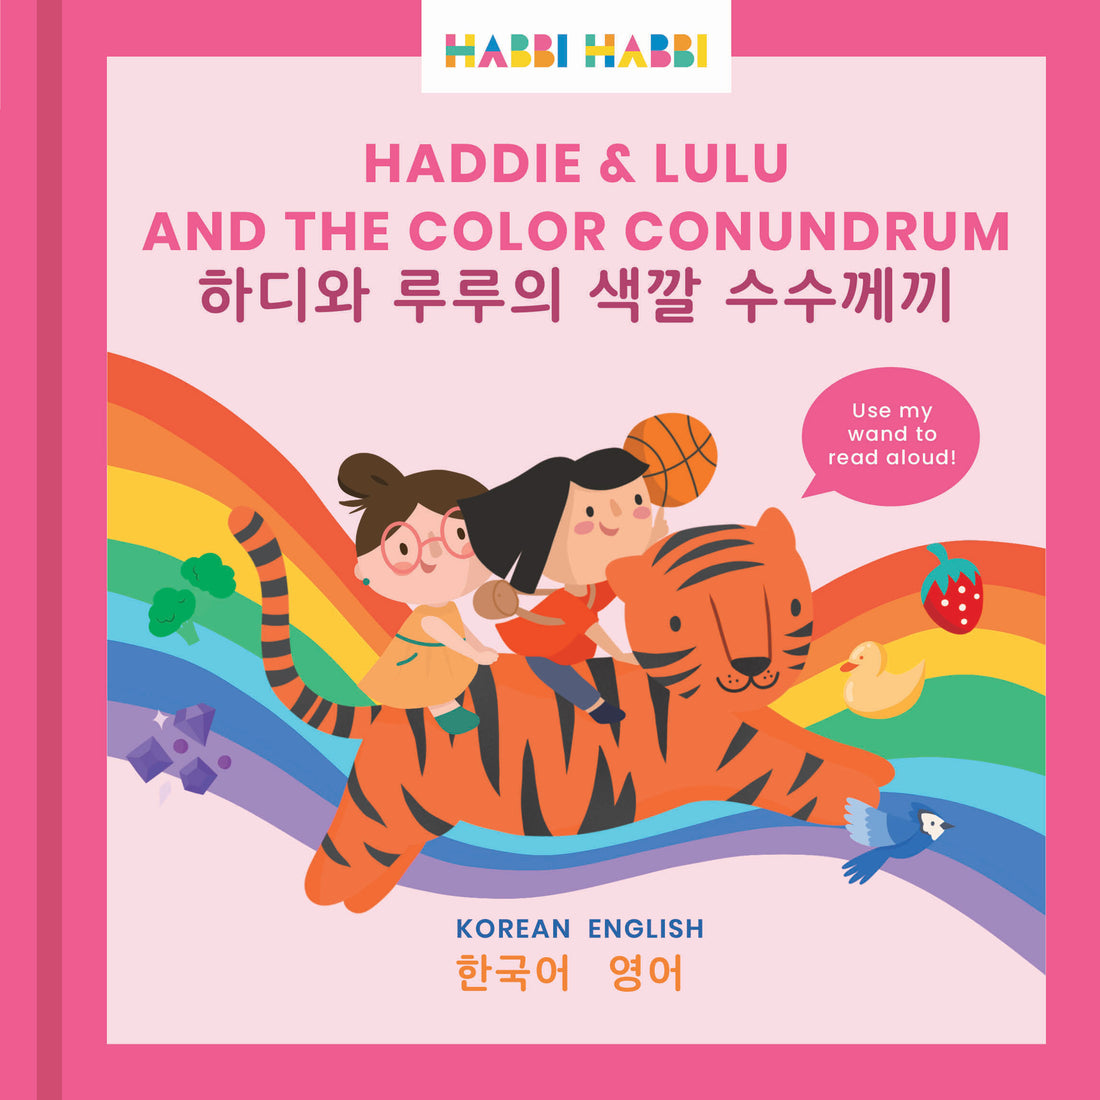 Haddie & Lulu and the Color Conundrum